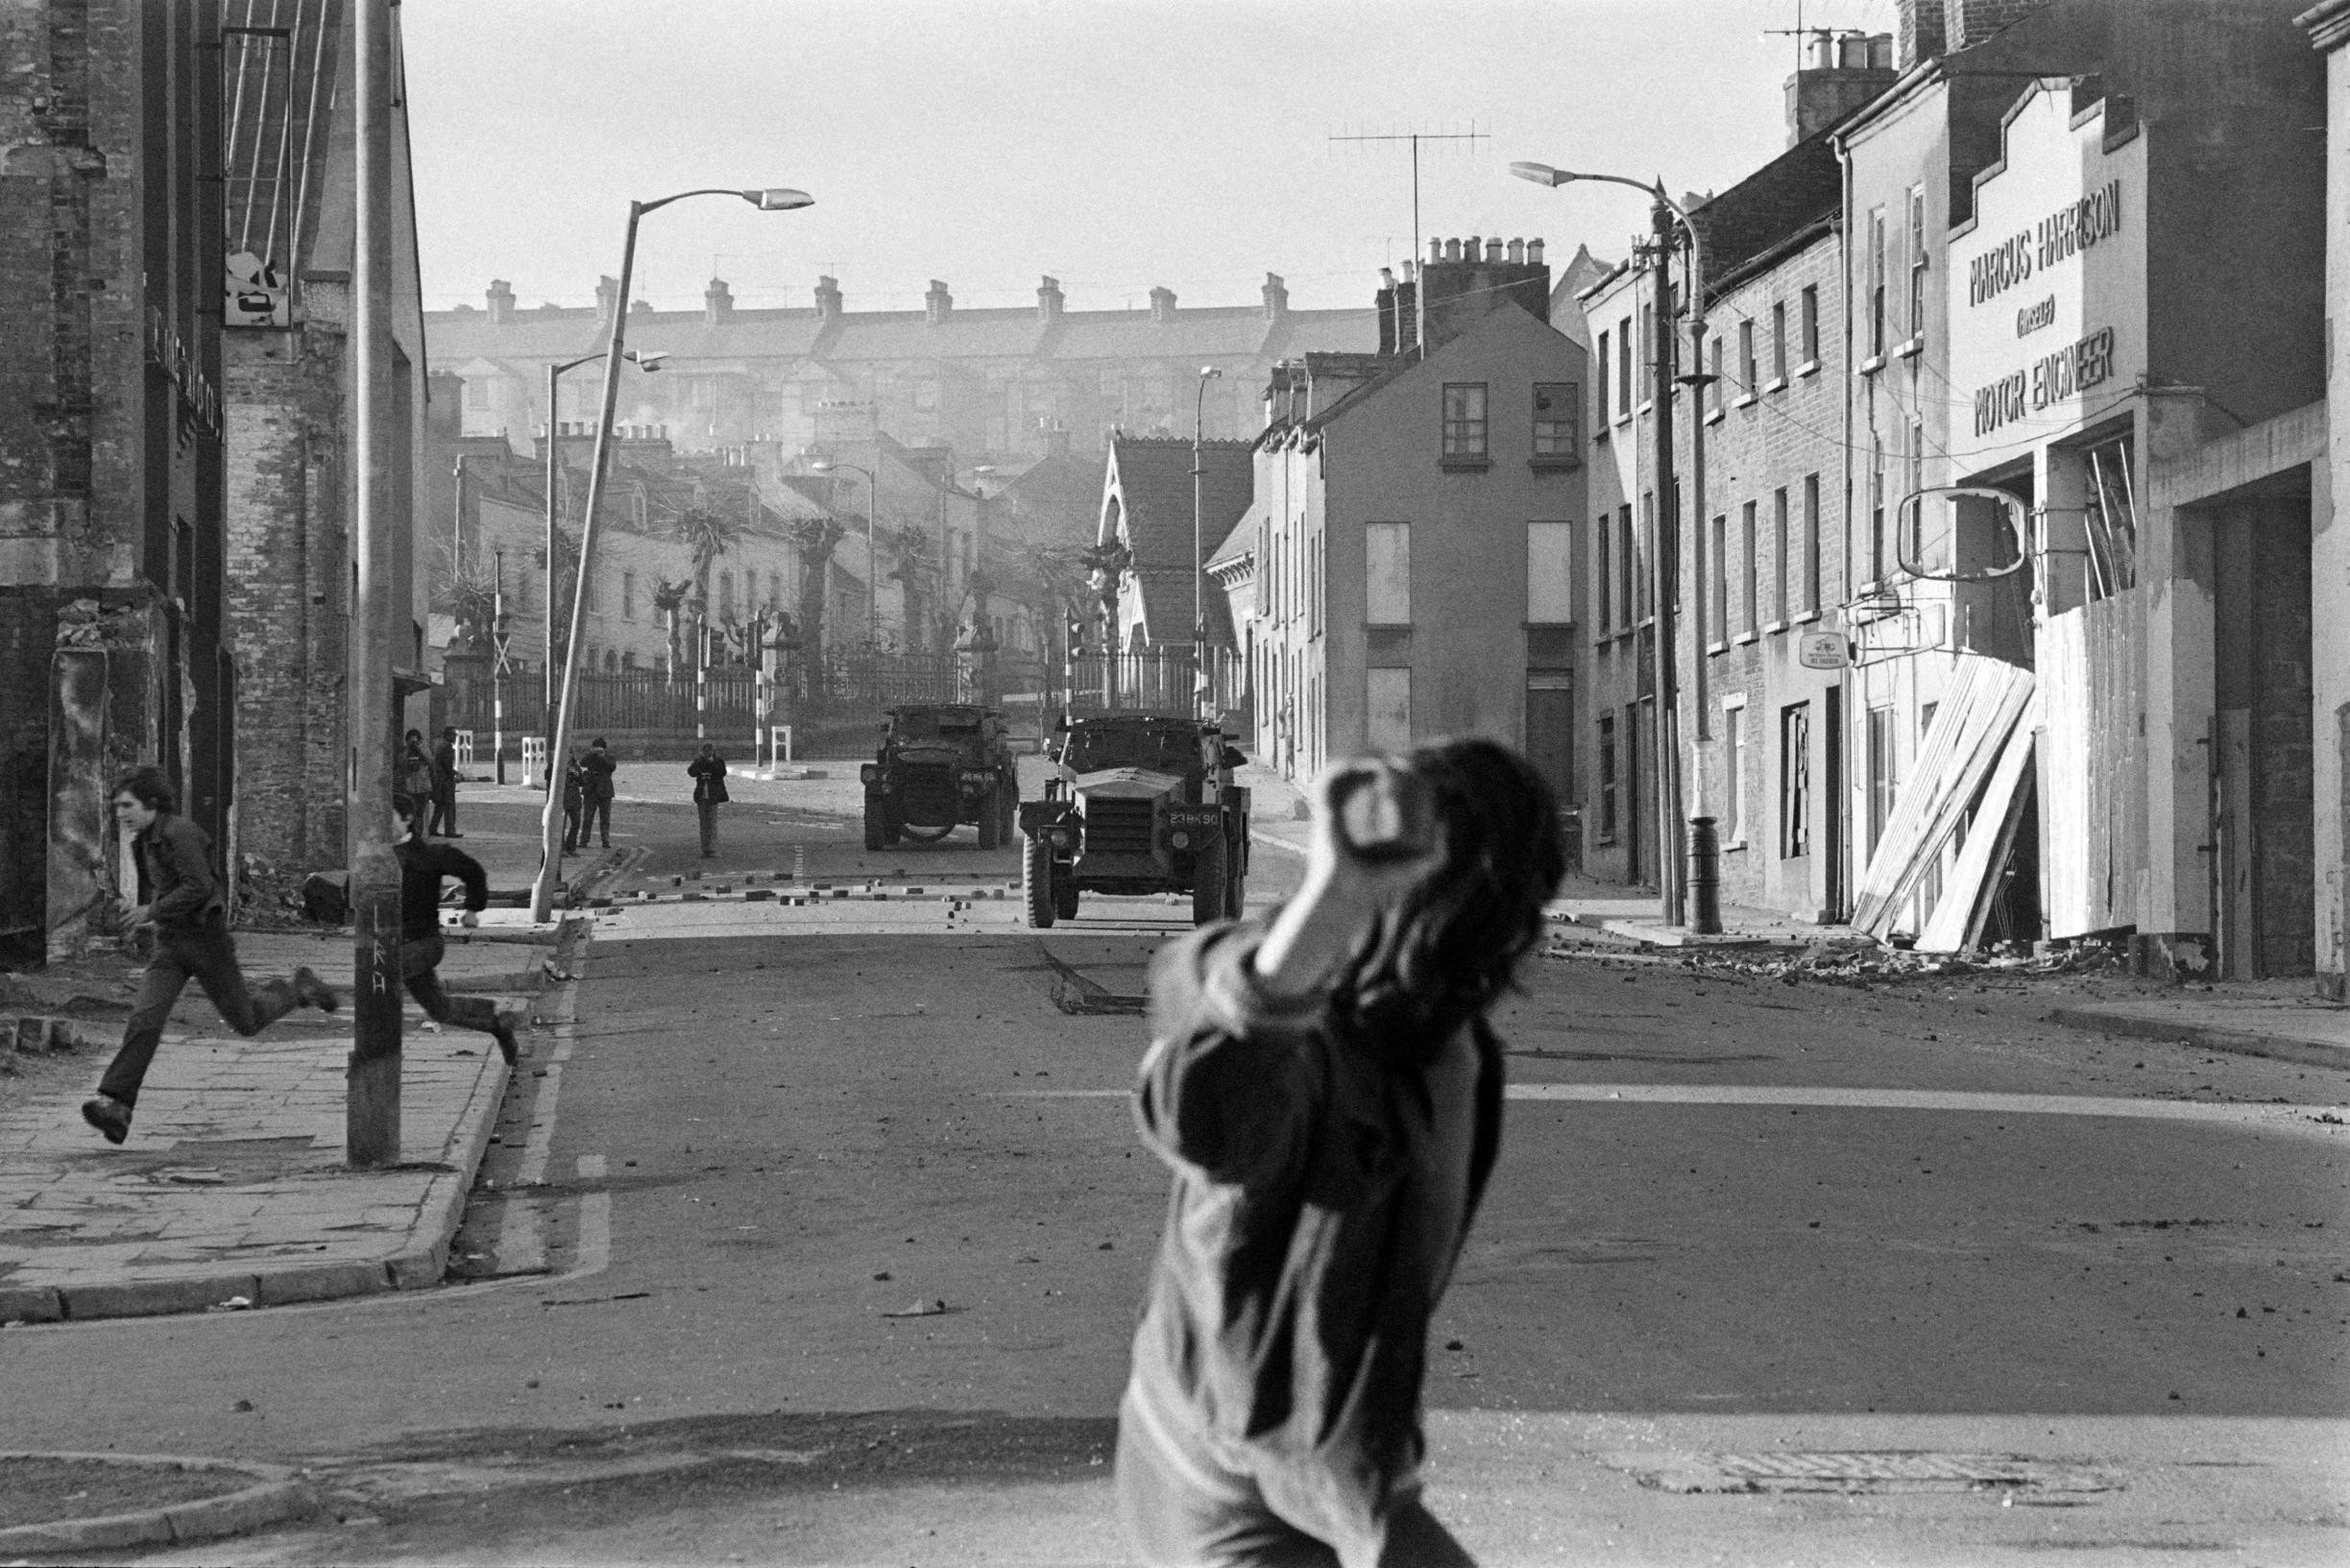 Fifty years ago, 14 Northern Irish protesters were shot dead on Bloody Sunday